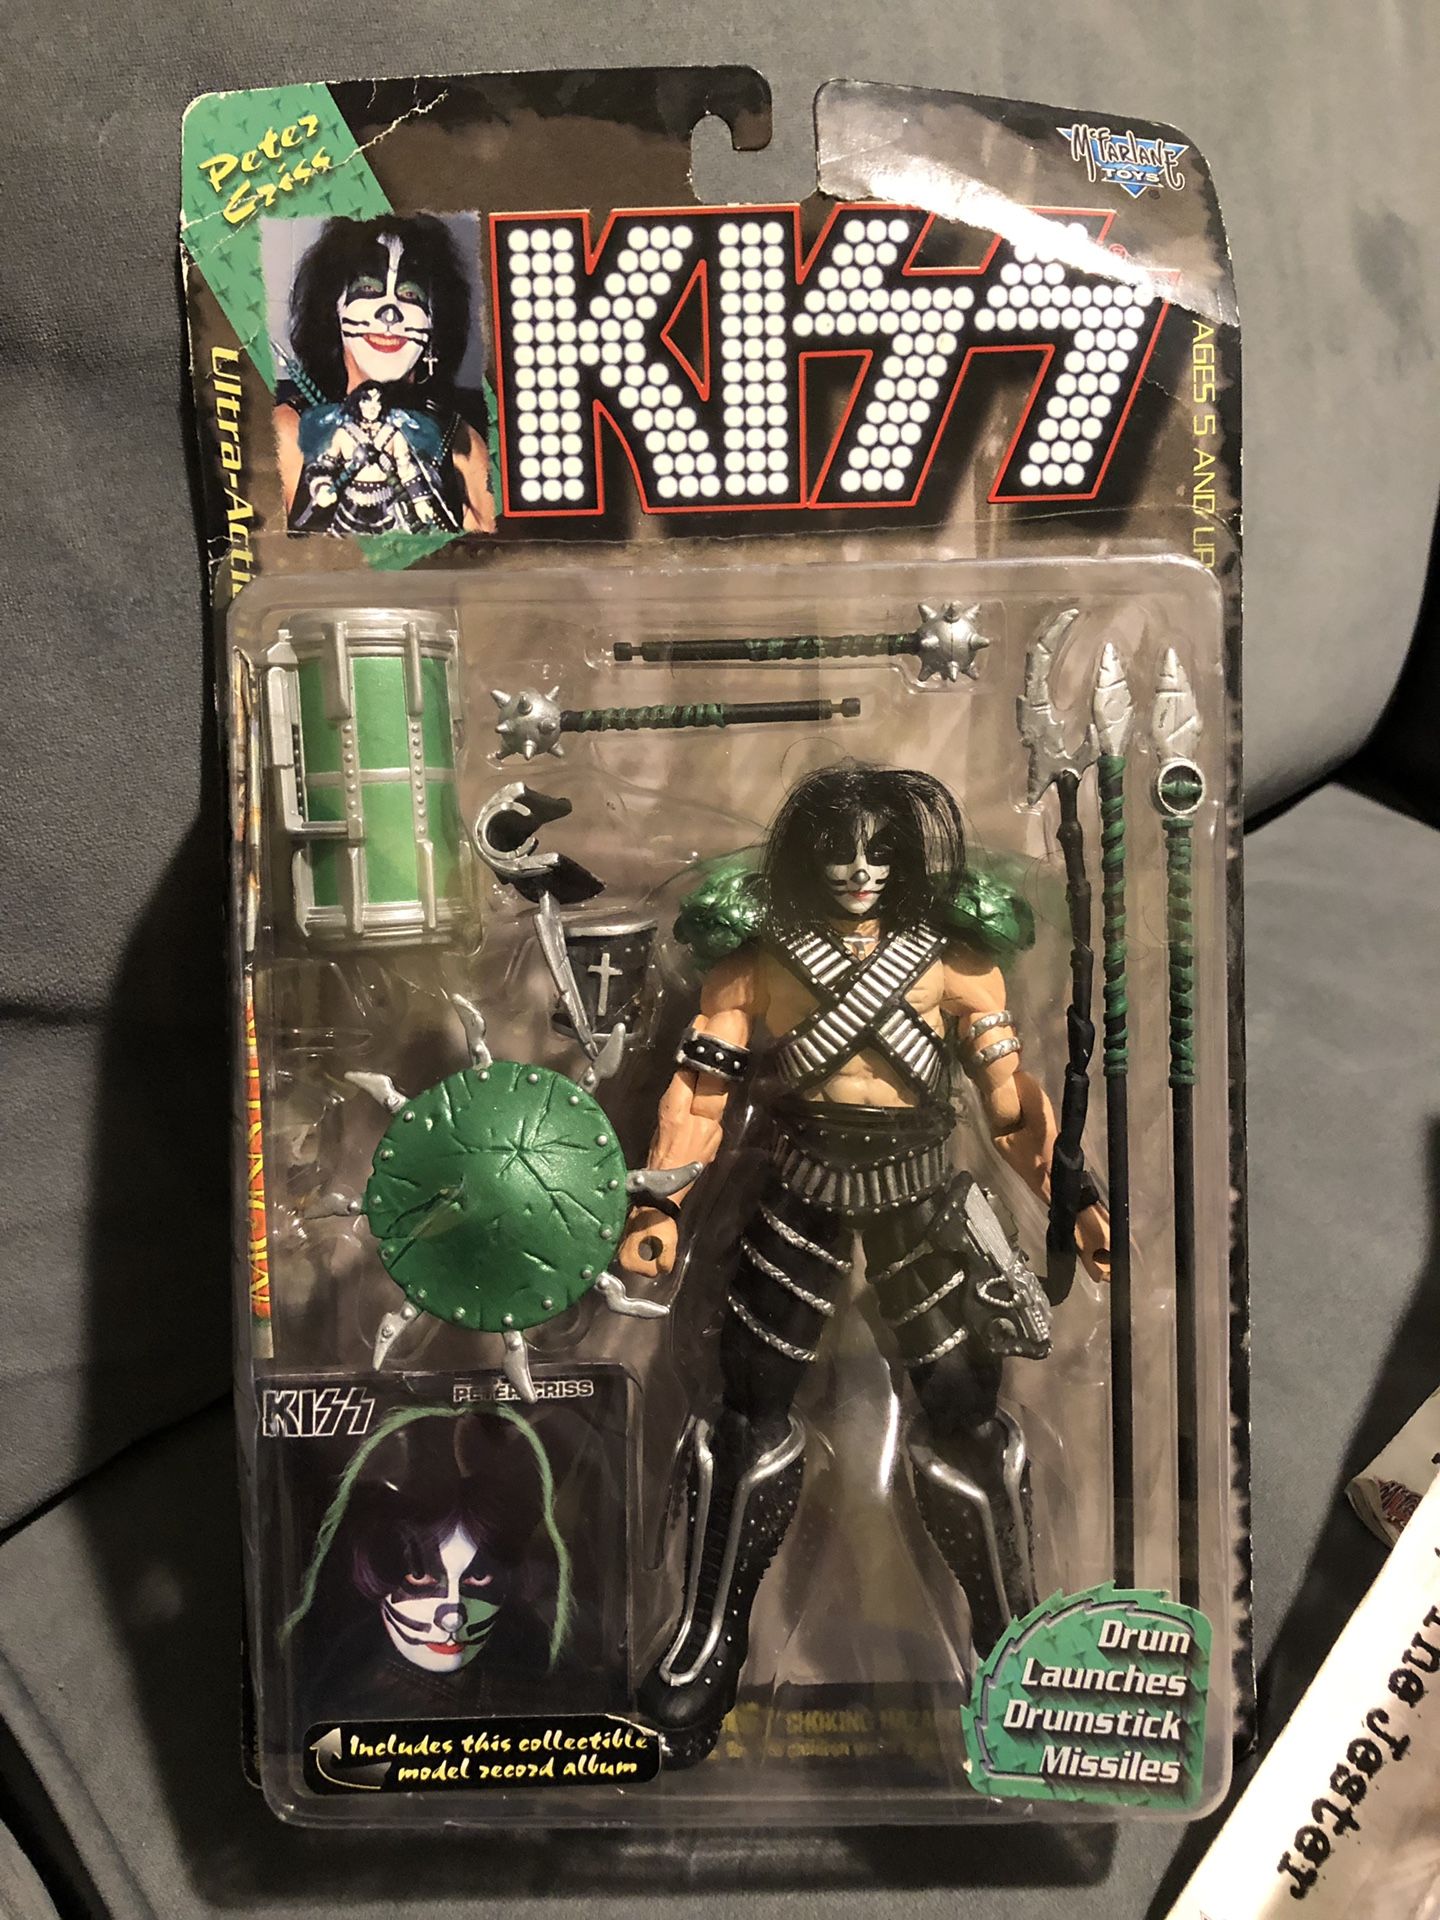 Lot of Kiss Action Figures